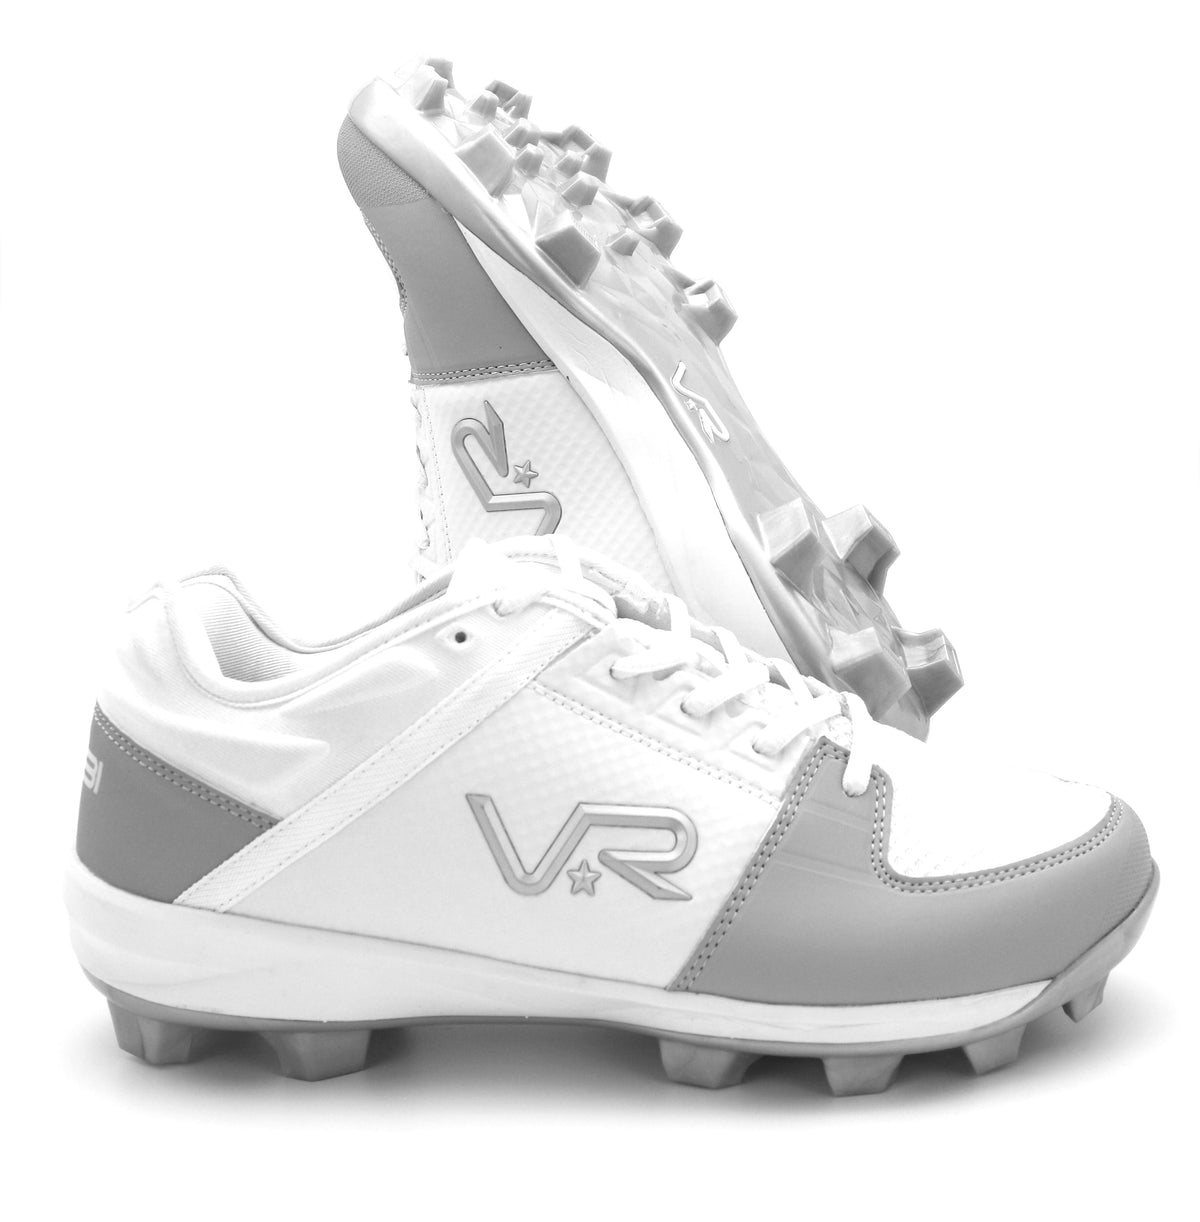 Men's/Youth VR76 TPU Cleats- White/Grey